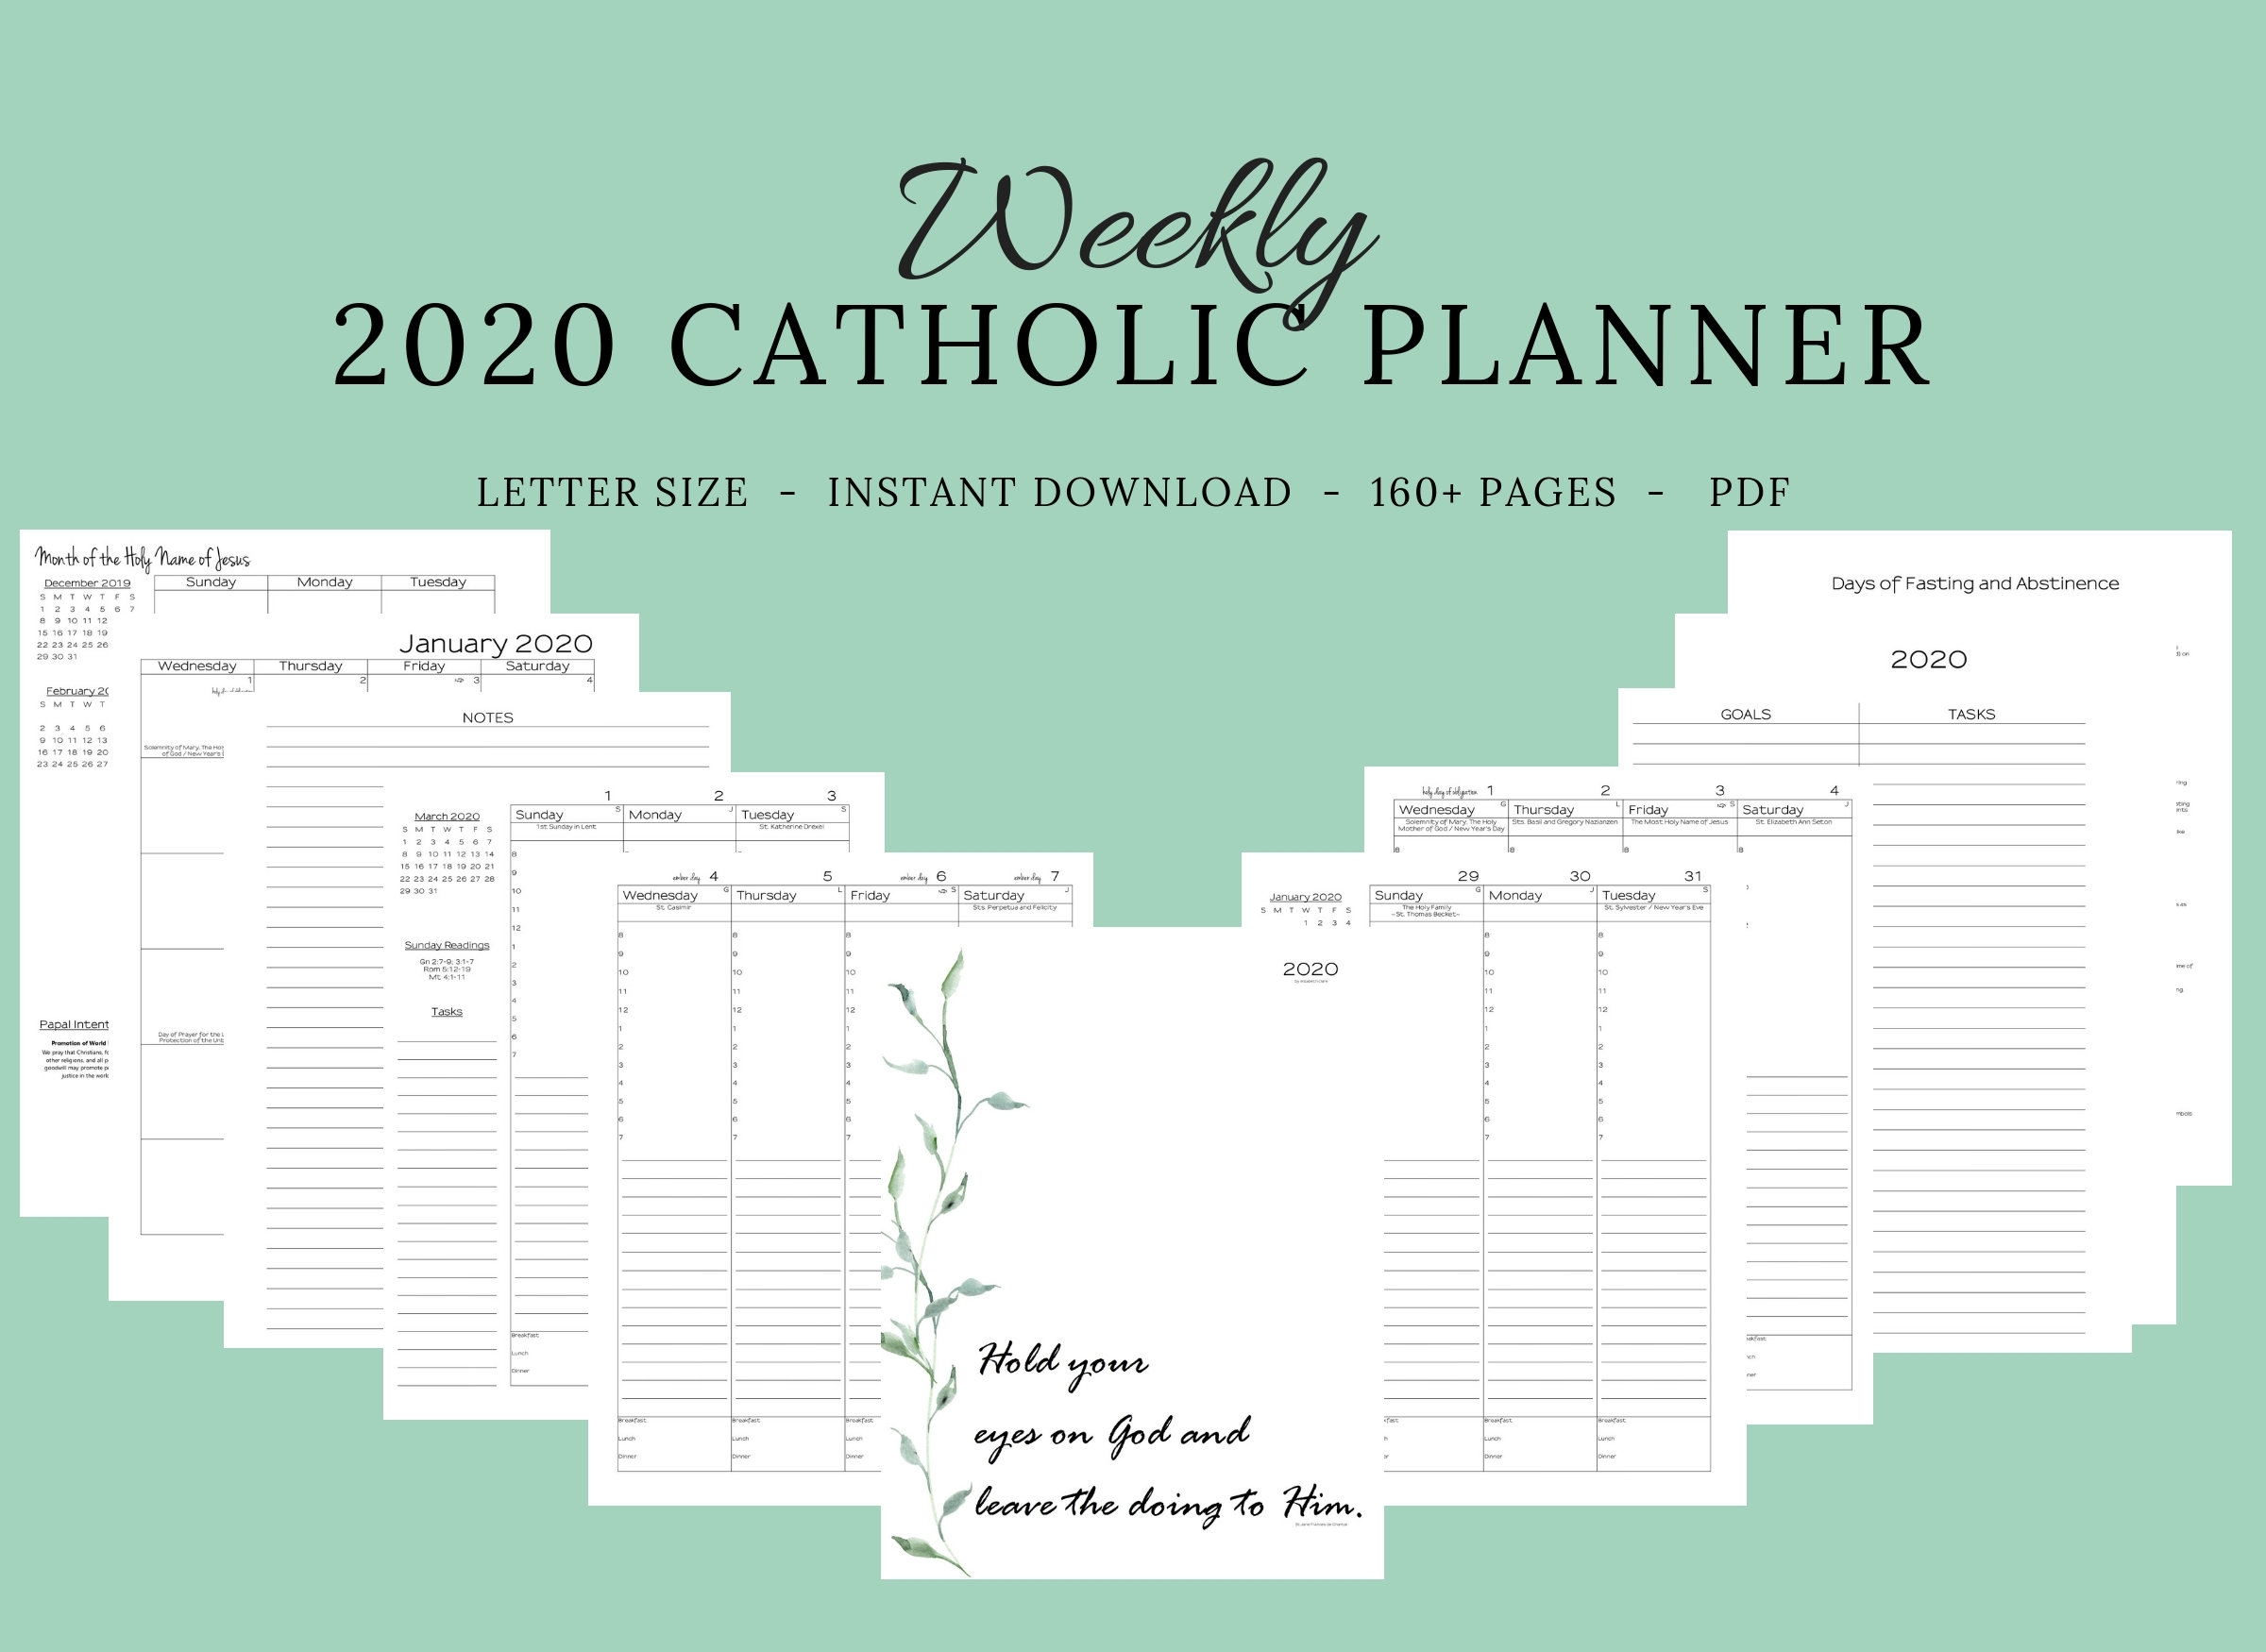 2020 Catholic Planner Weekly Printable: Daily Planner / | Etsy pertaining to Printable Catholic Liturgical Calendar 2020